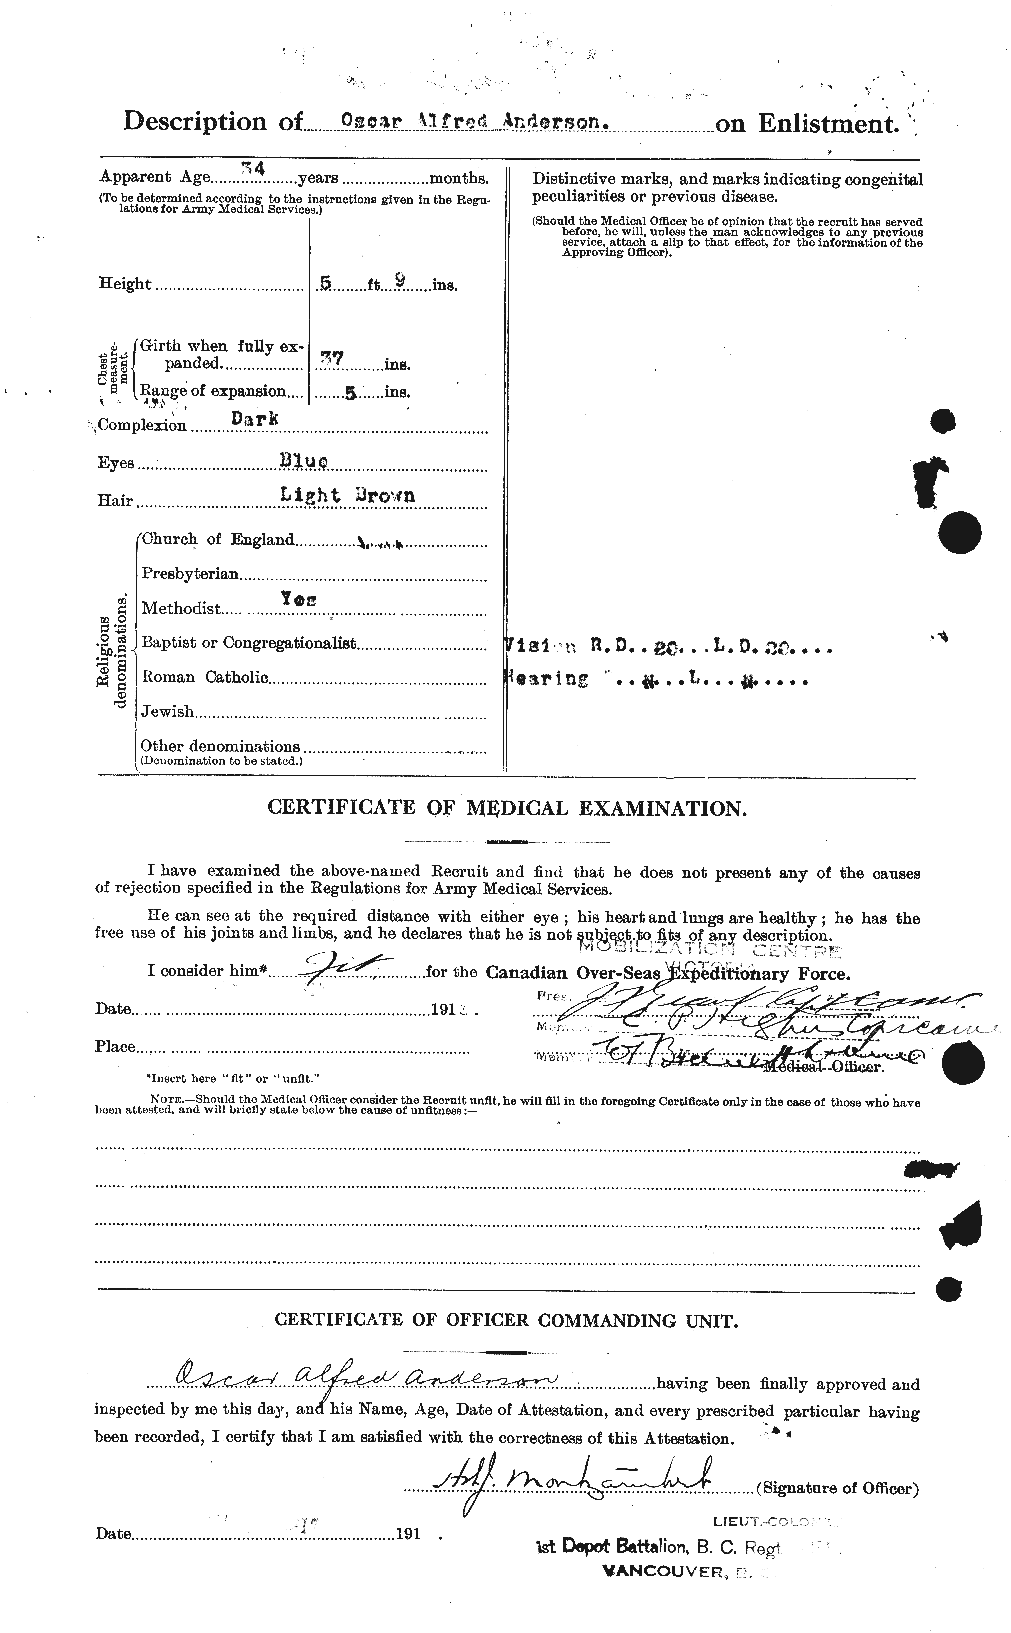 Personnel Records of the First World War - CEF 207383b